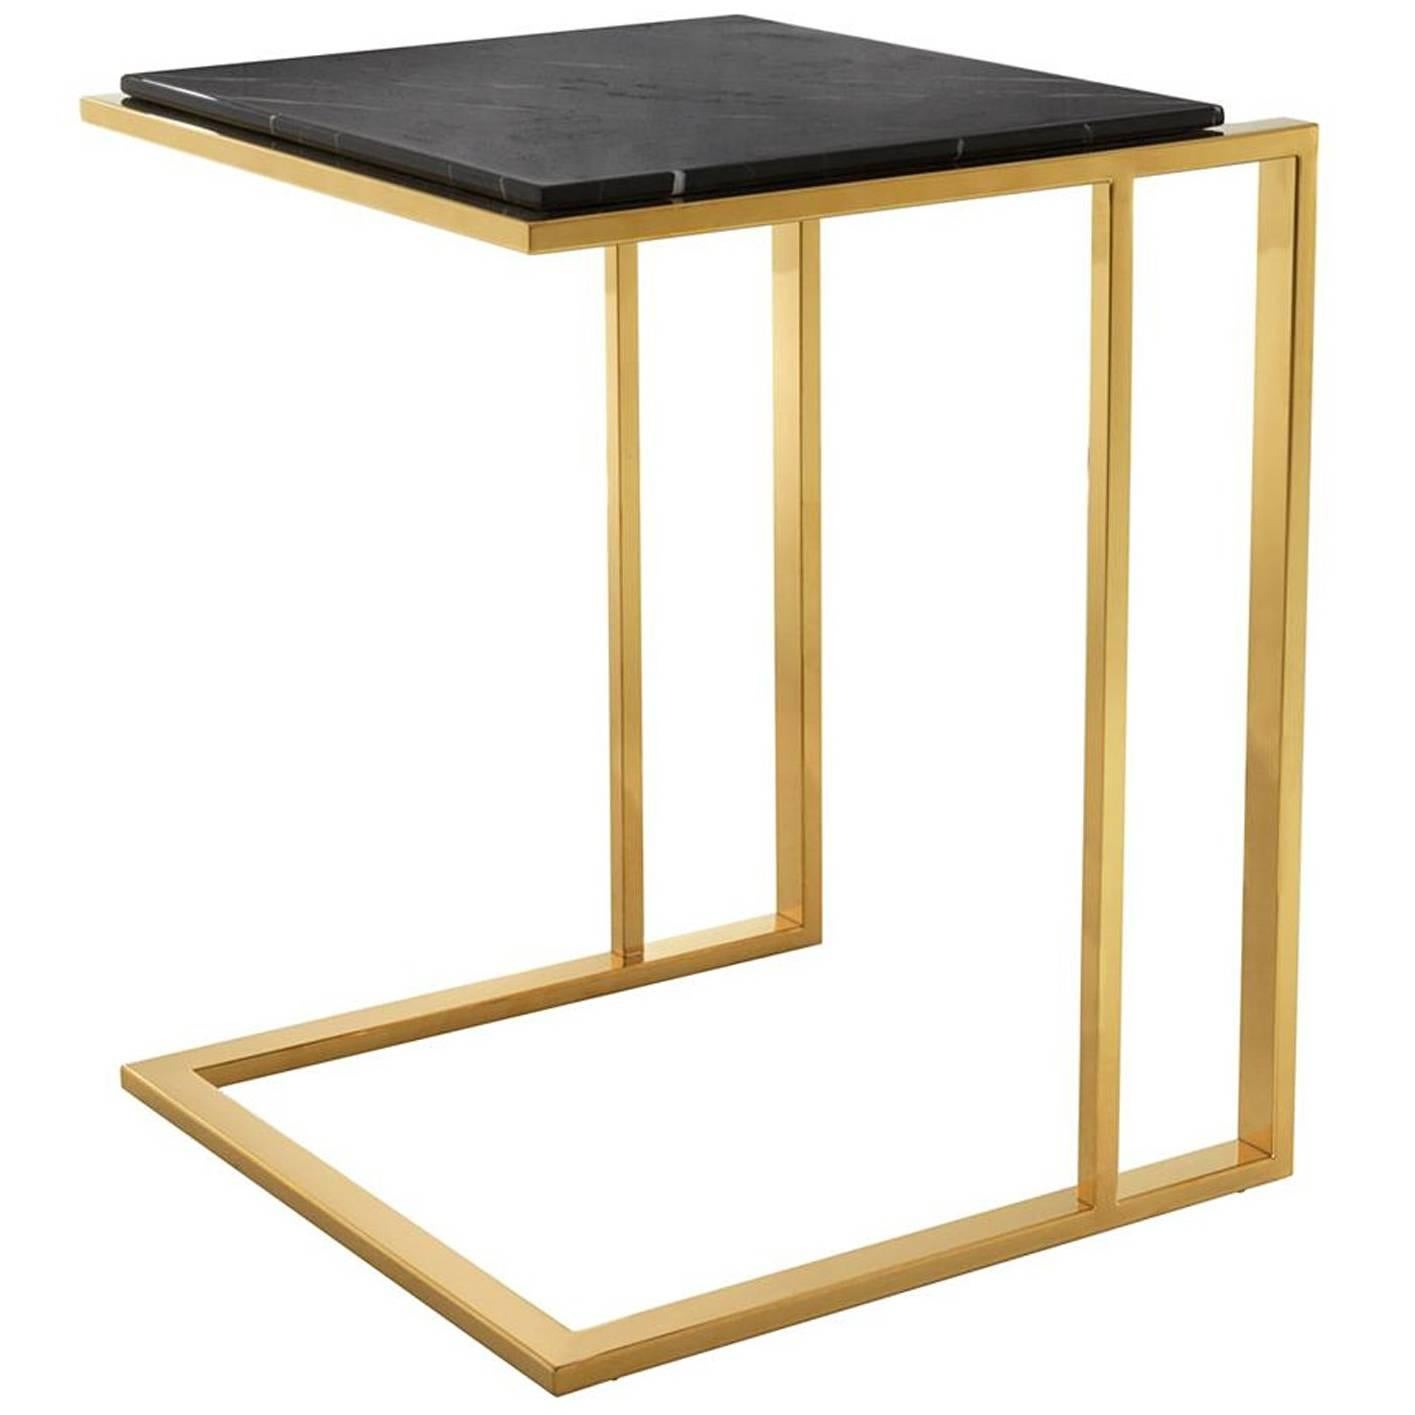 Apetizer Side Table in Gold Finish and Black Marble Top